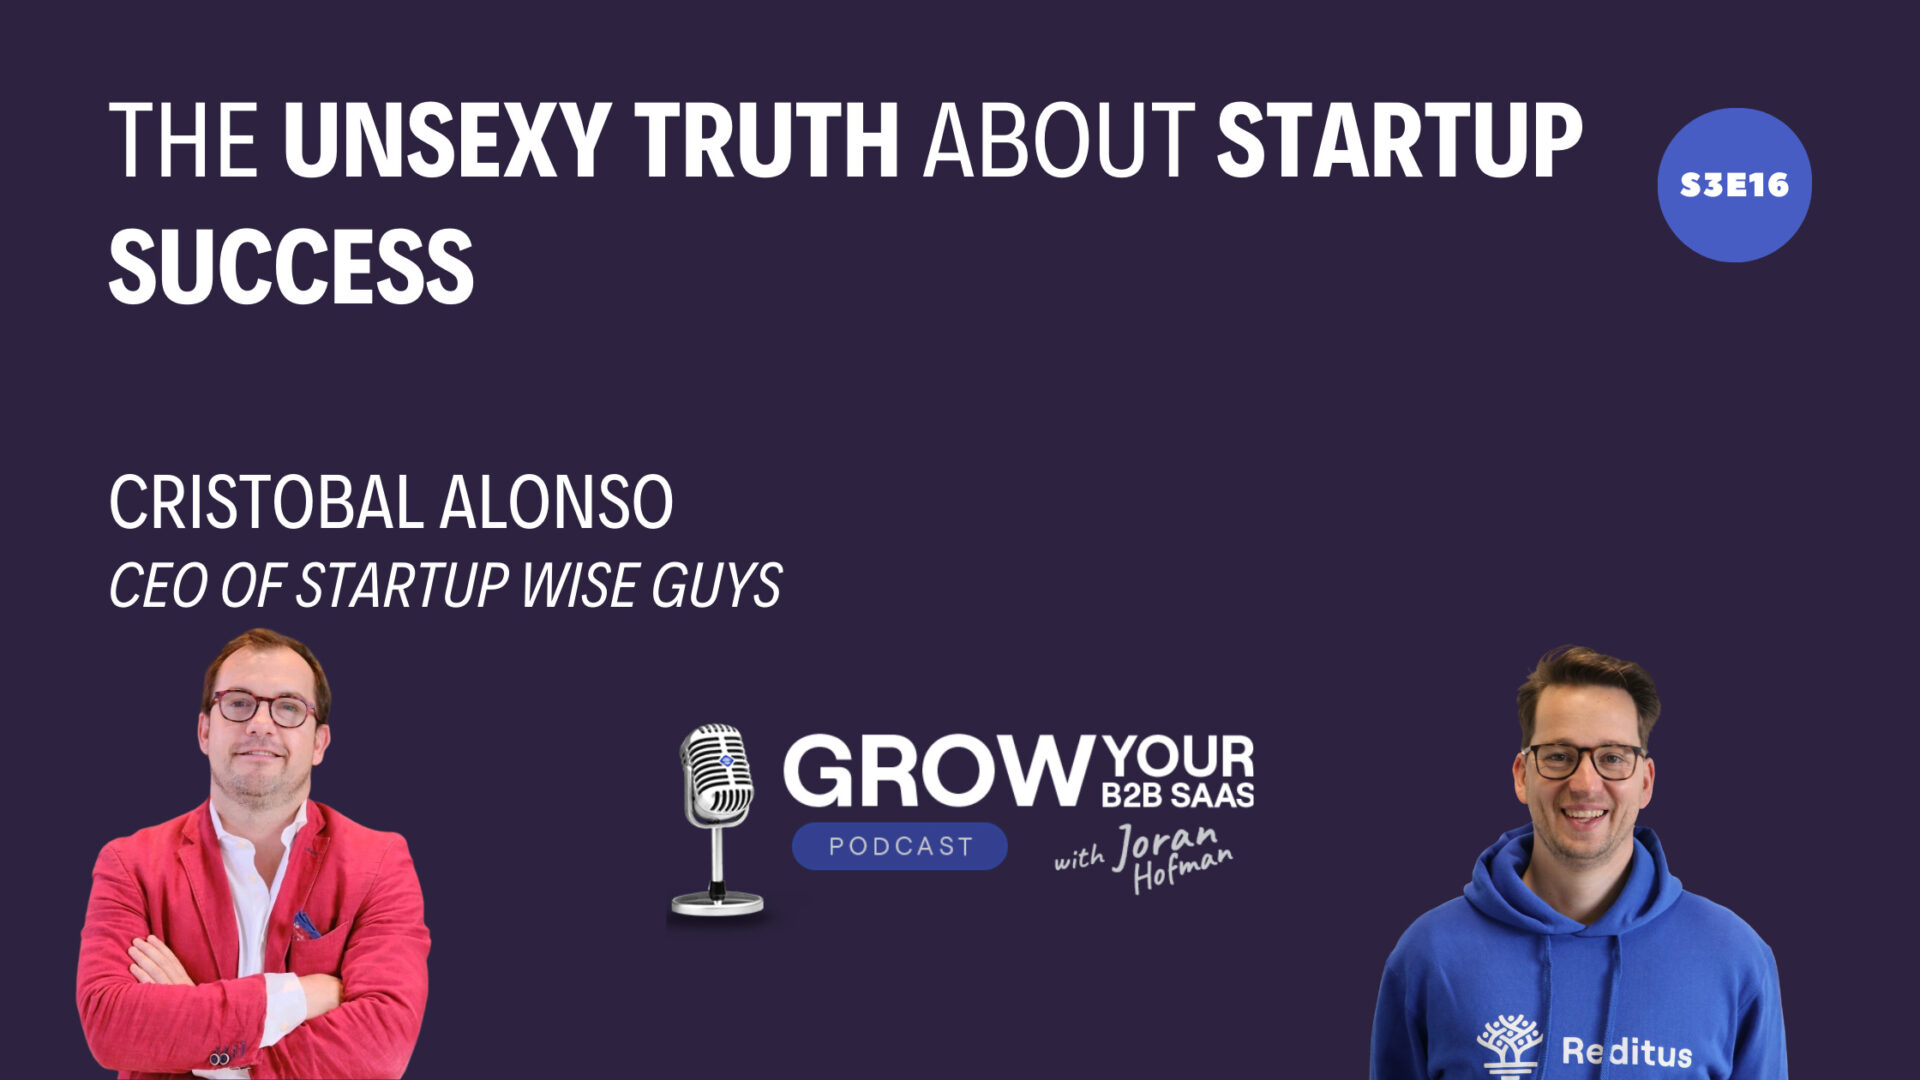 https://www.getreditus.com/podcast/s3e16-the-unsexy-truth-about-startup-success-with-cristobal-alonso/